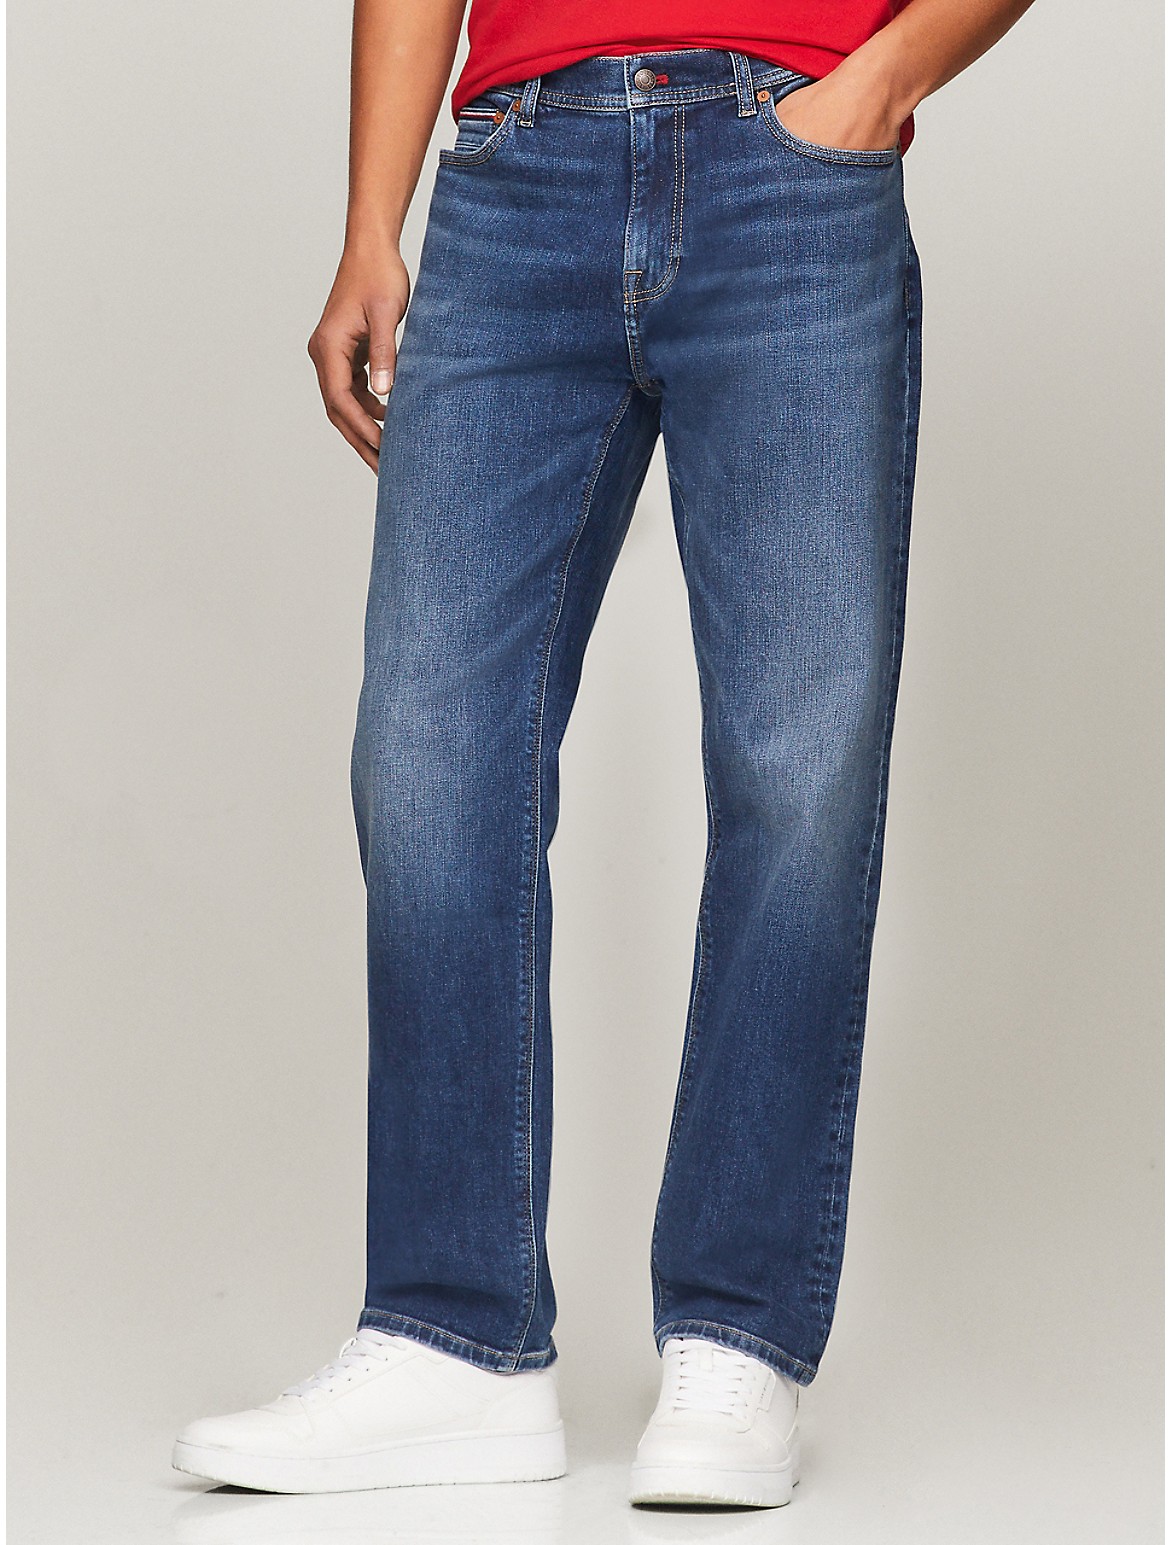 Tommy Hilfiger Men's Relaxed Straight Fit Indigo Wash Jean